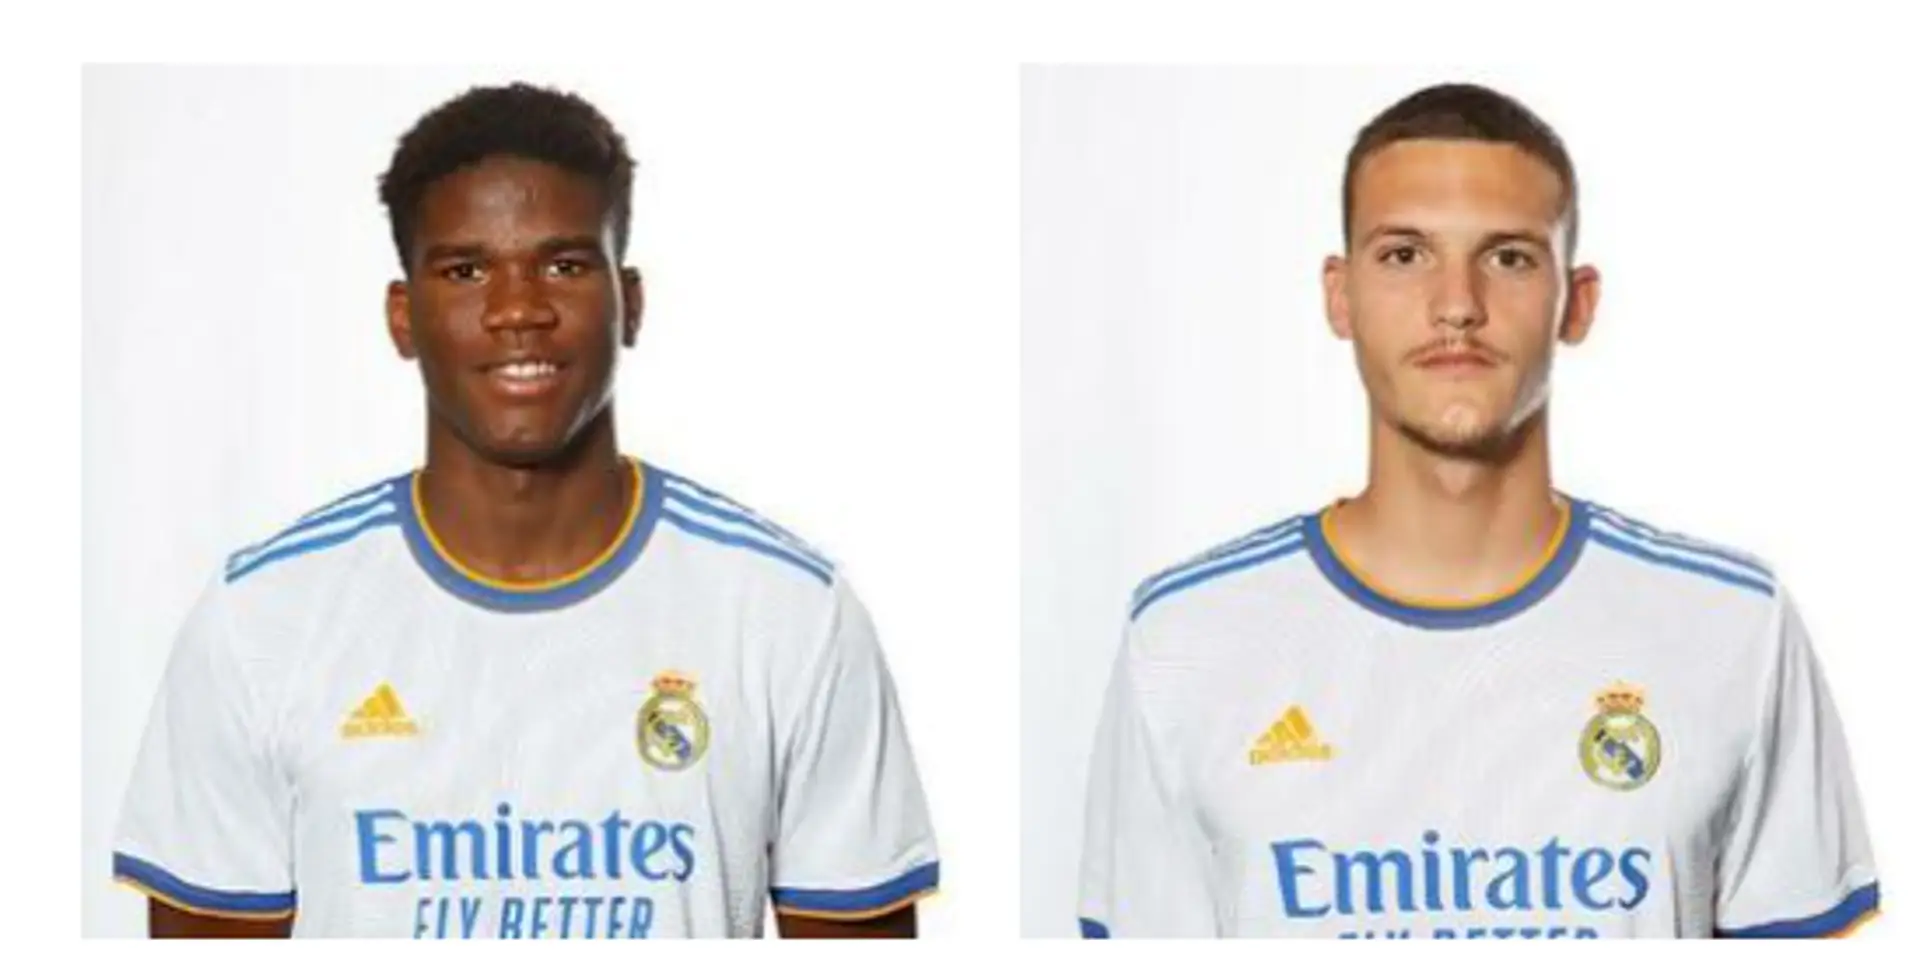 REAL MADRID SHOULD CLOSELY PUT AN EYE FOR THESE YOUNG CBs.